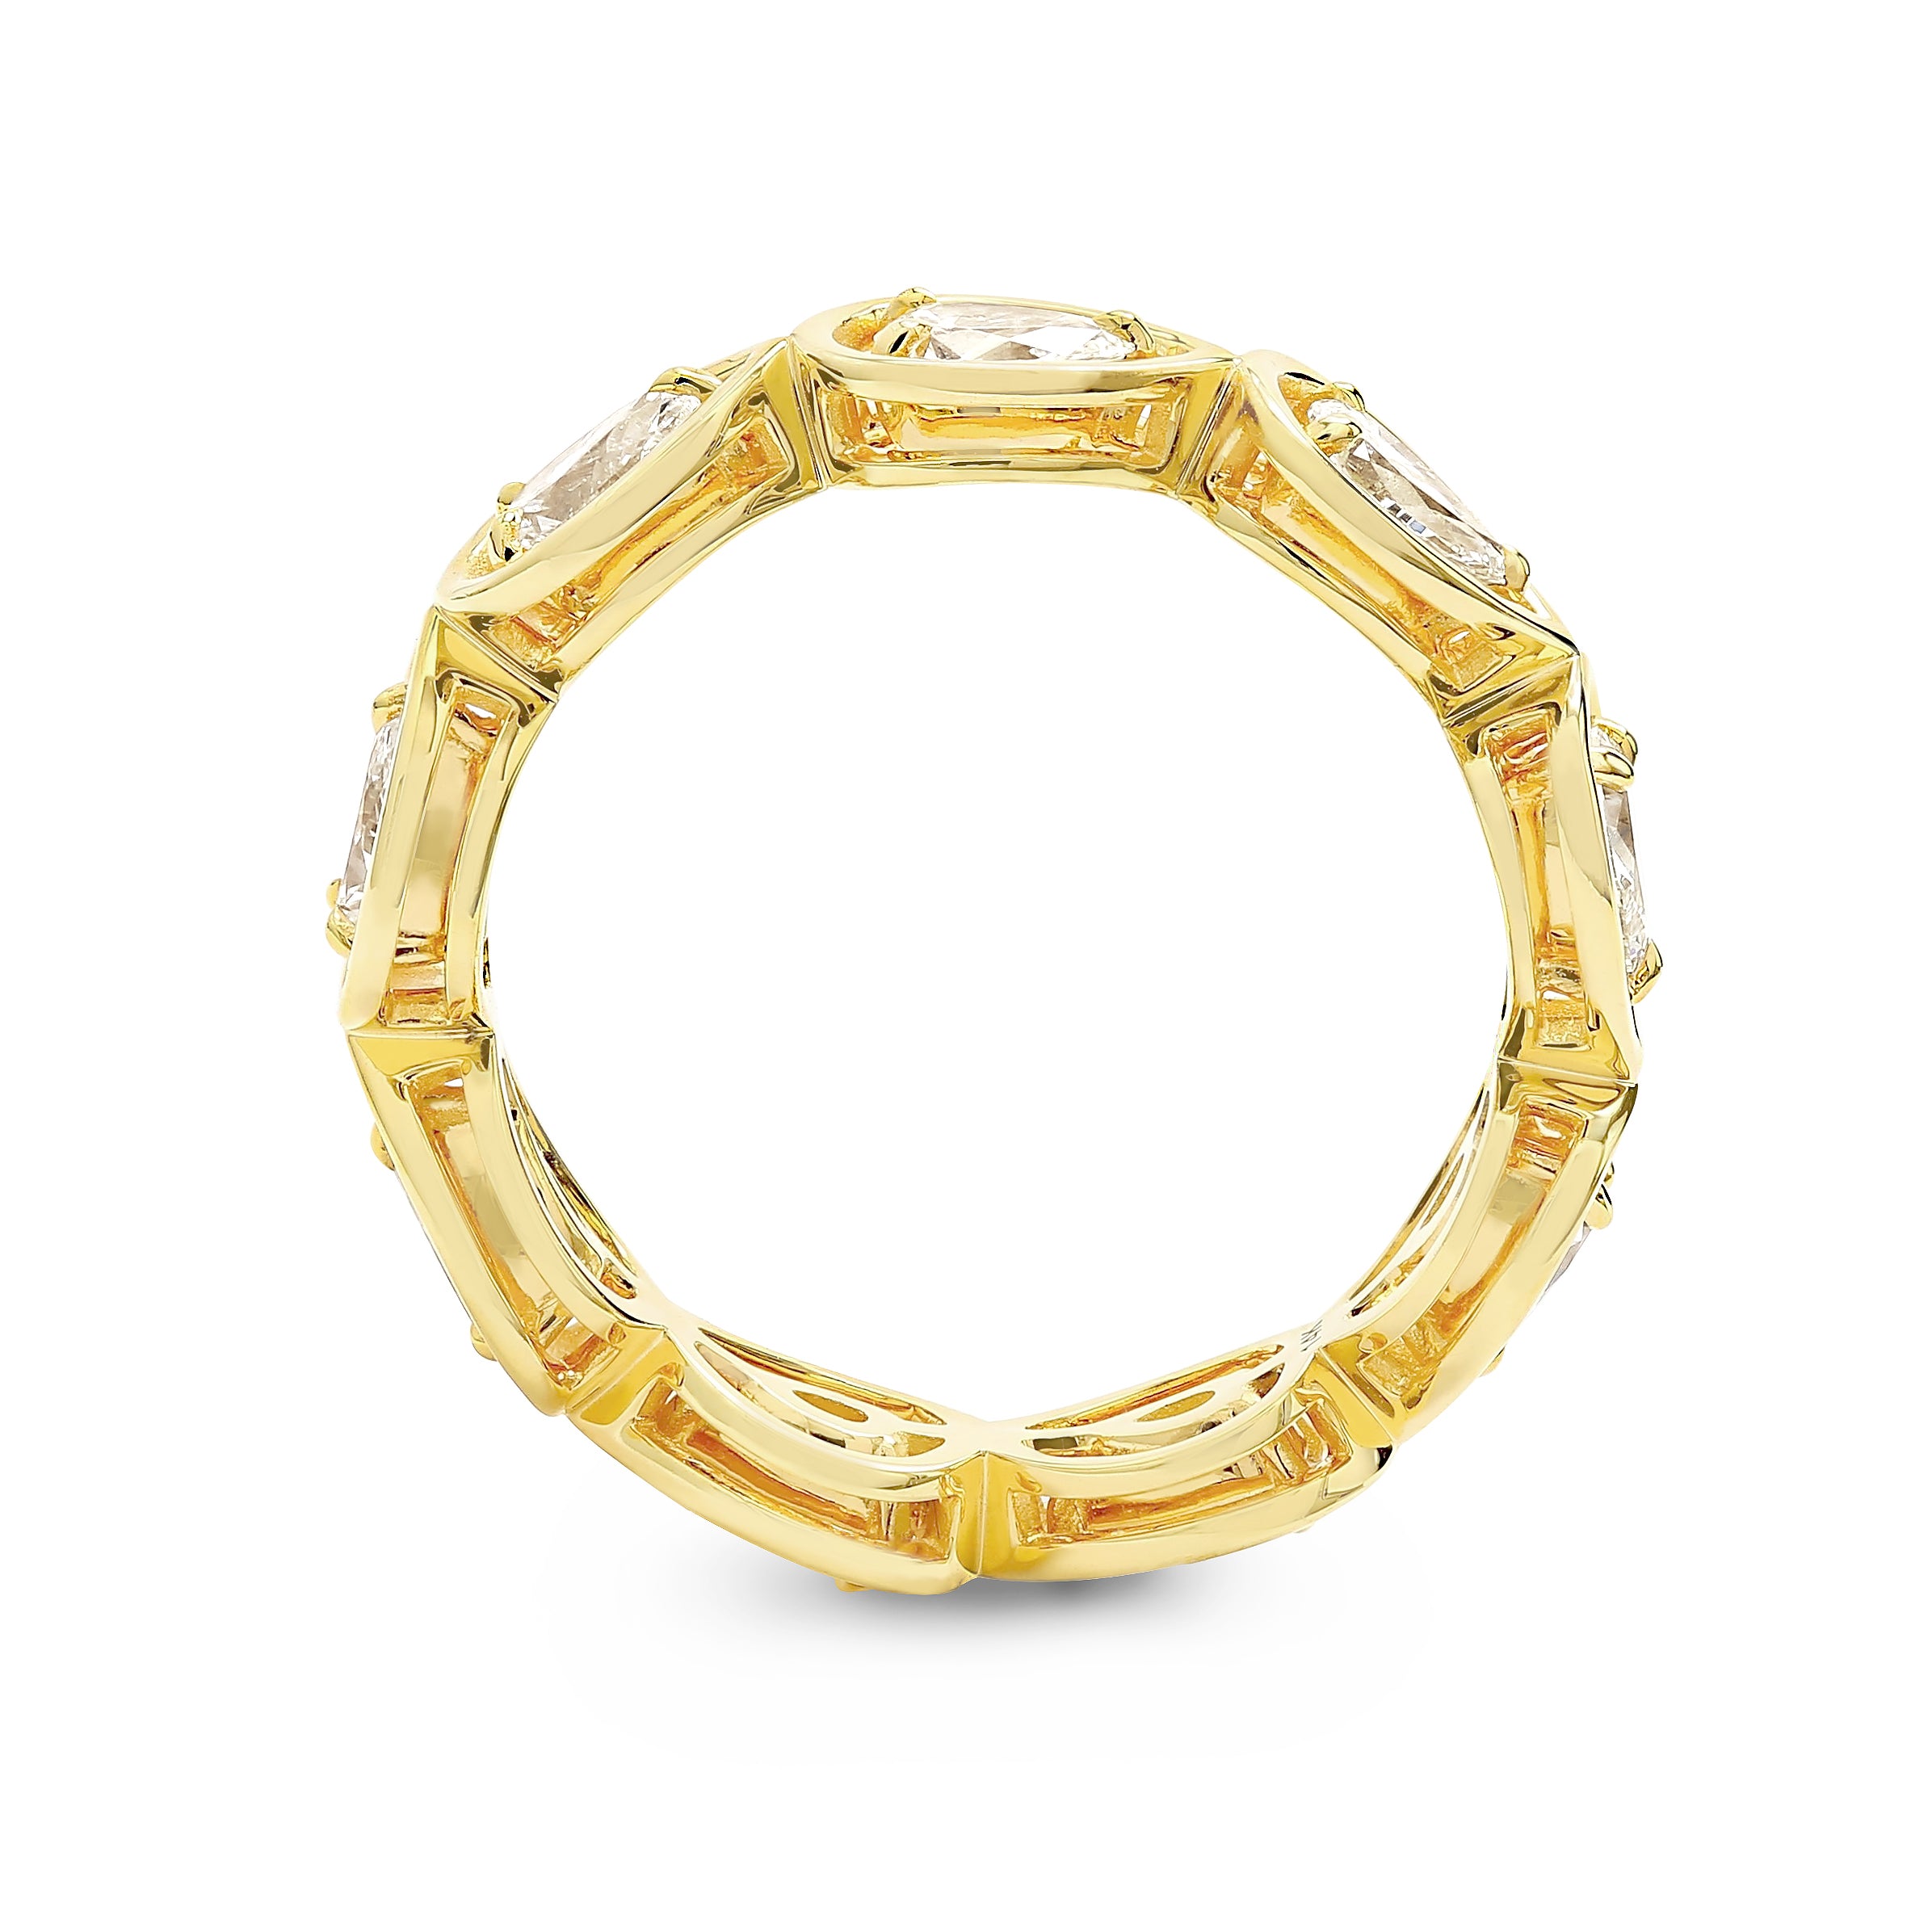 Shimansky - Saturn Pear Diamond Eternity Ring 1.00ct crafted in 14K Yellow Gold